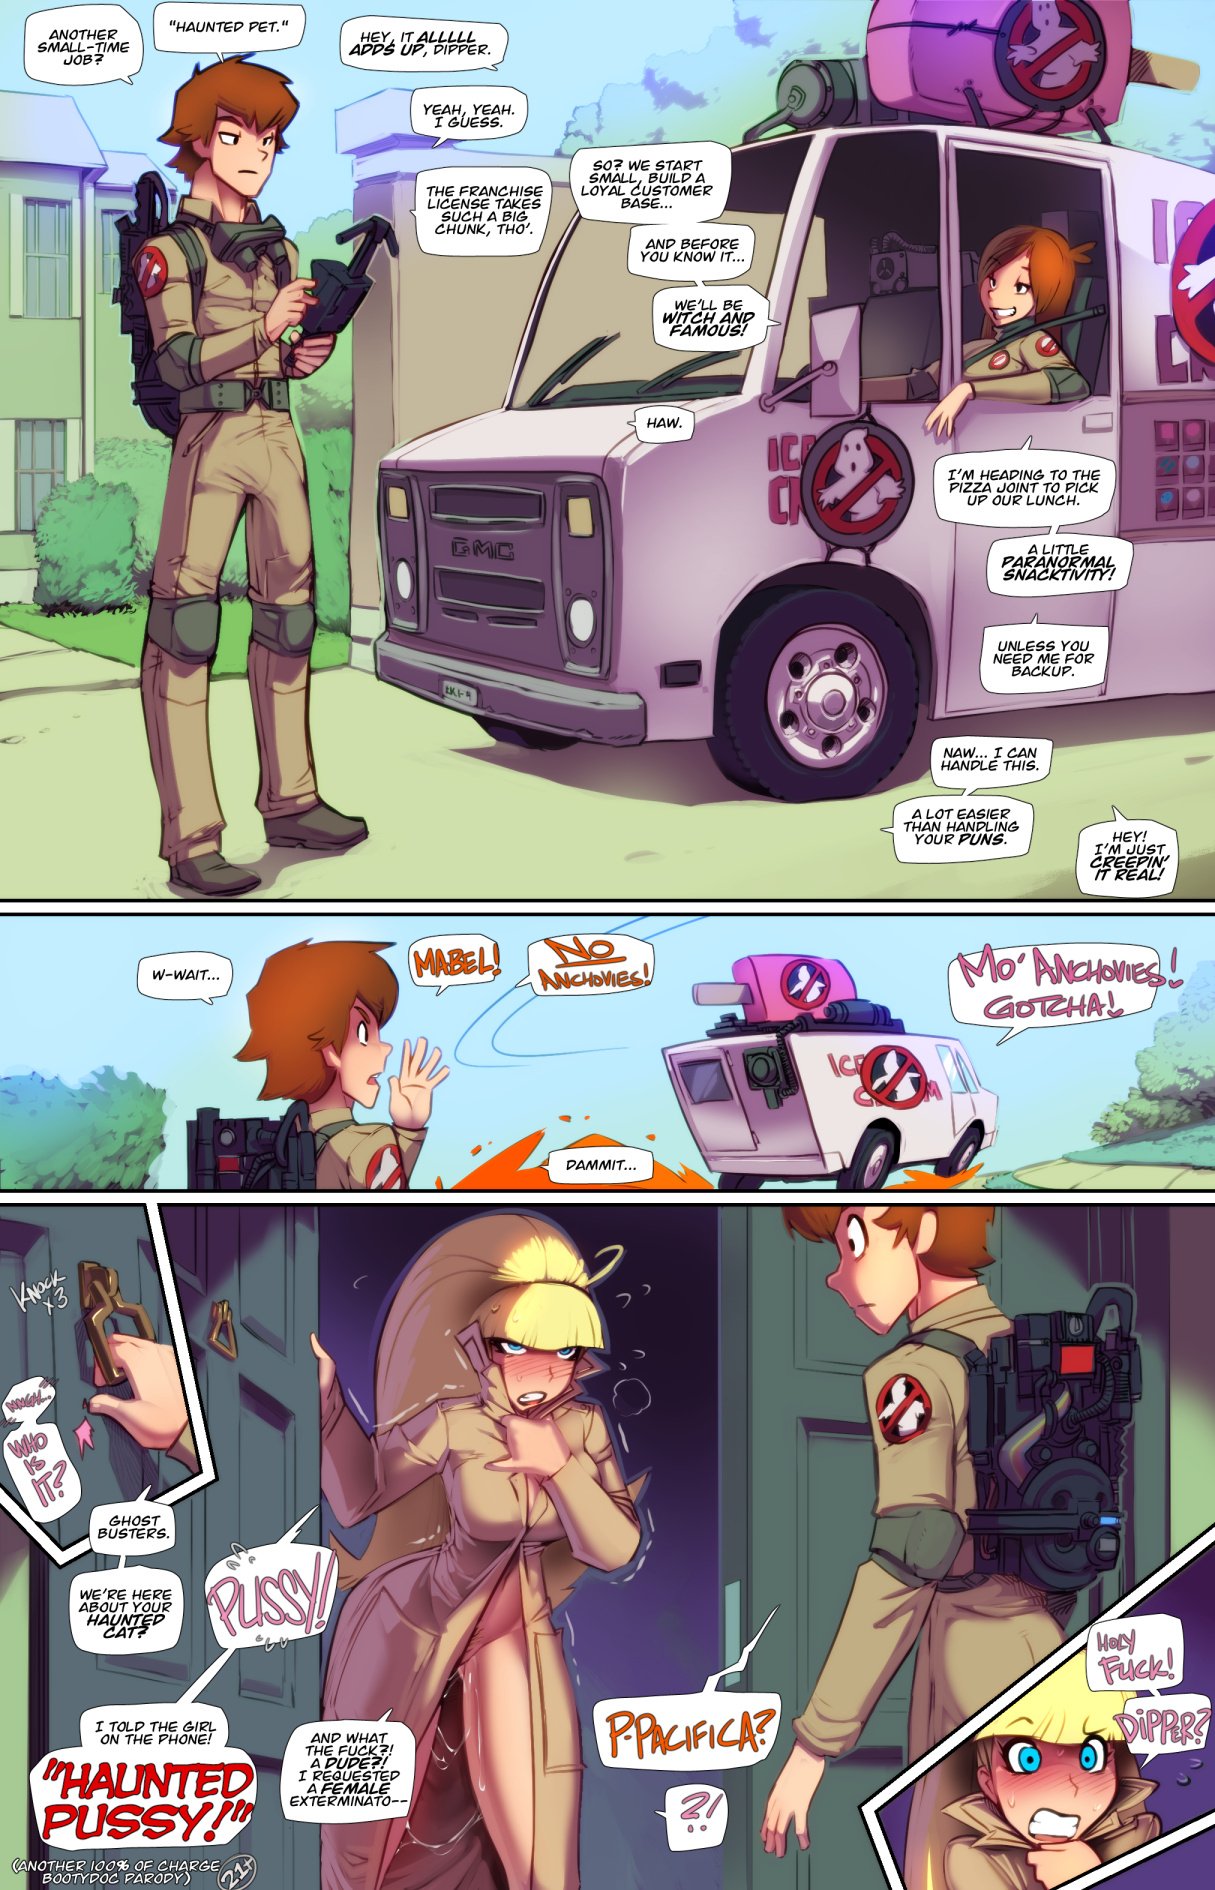 Pussy Lesbian Porn Comics - Haunted Pussy! (Various) [Fred Perry] - 1 . Haunted Pussy! - Chapter 1  (Gravity Falls) [Fred Perry] - AllPornComic